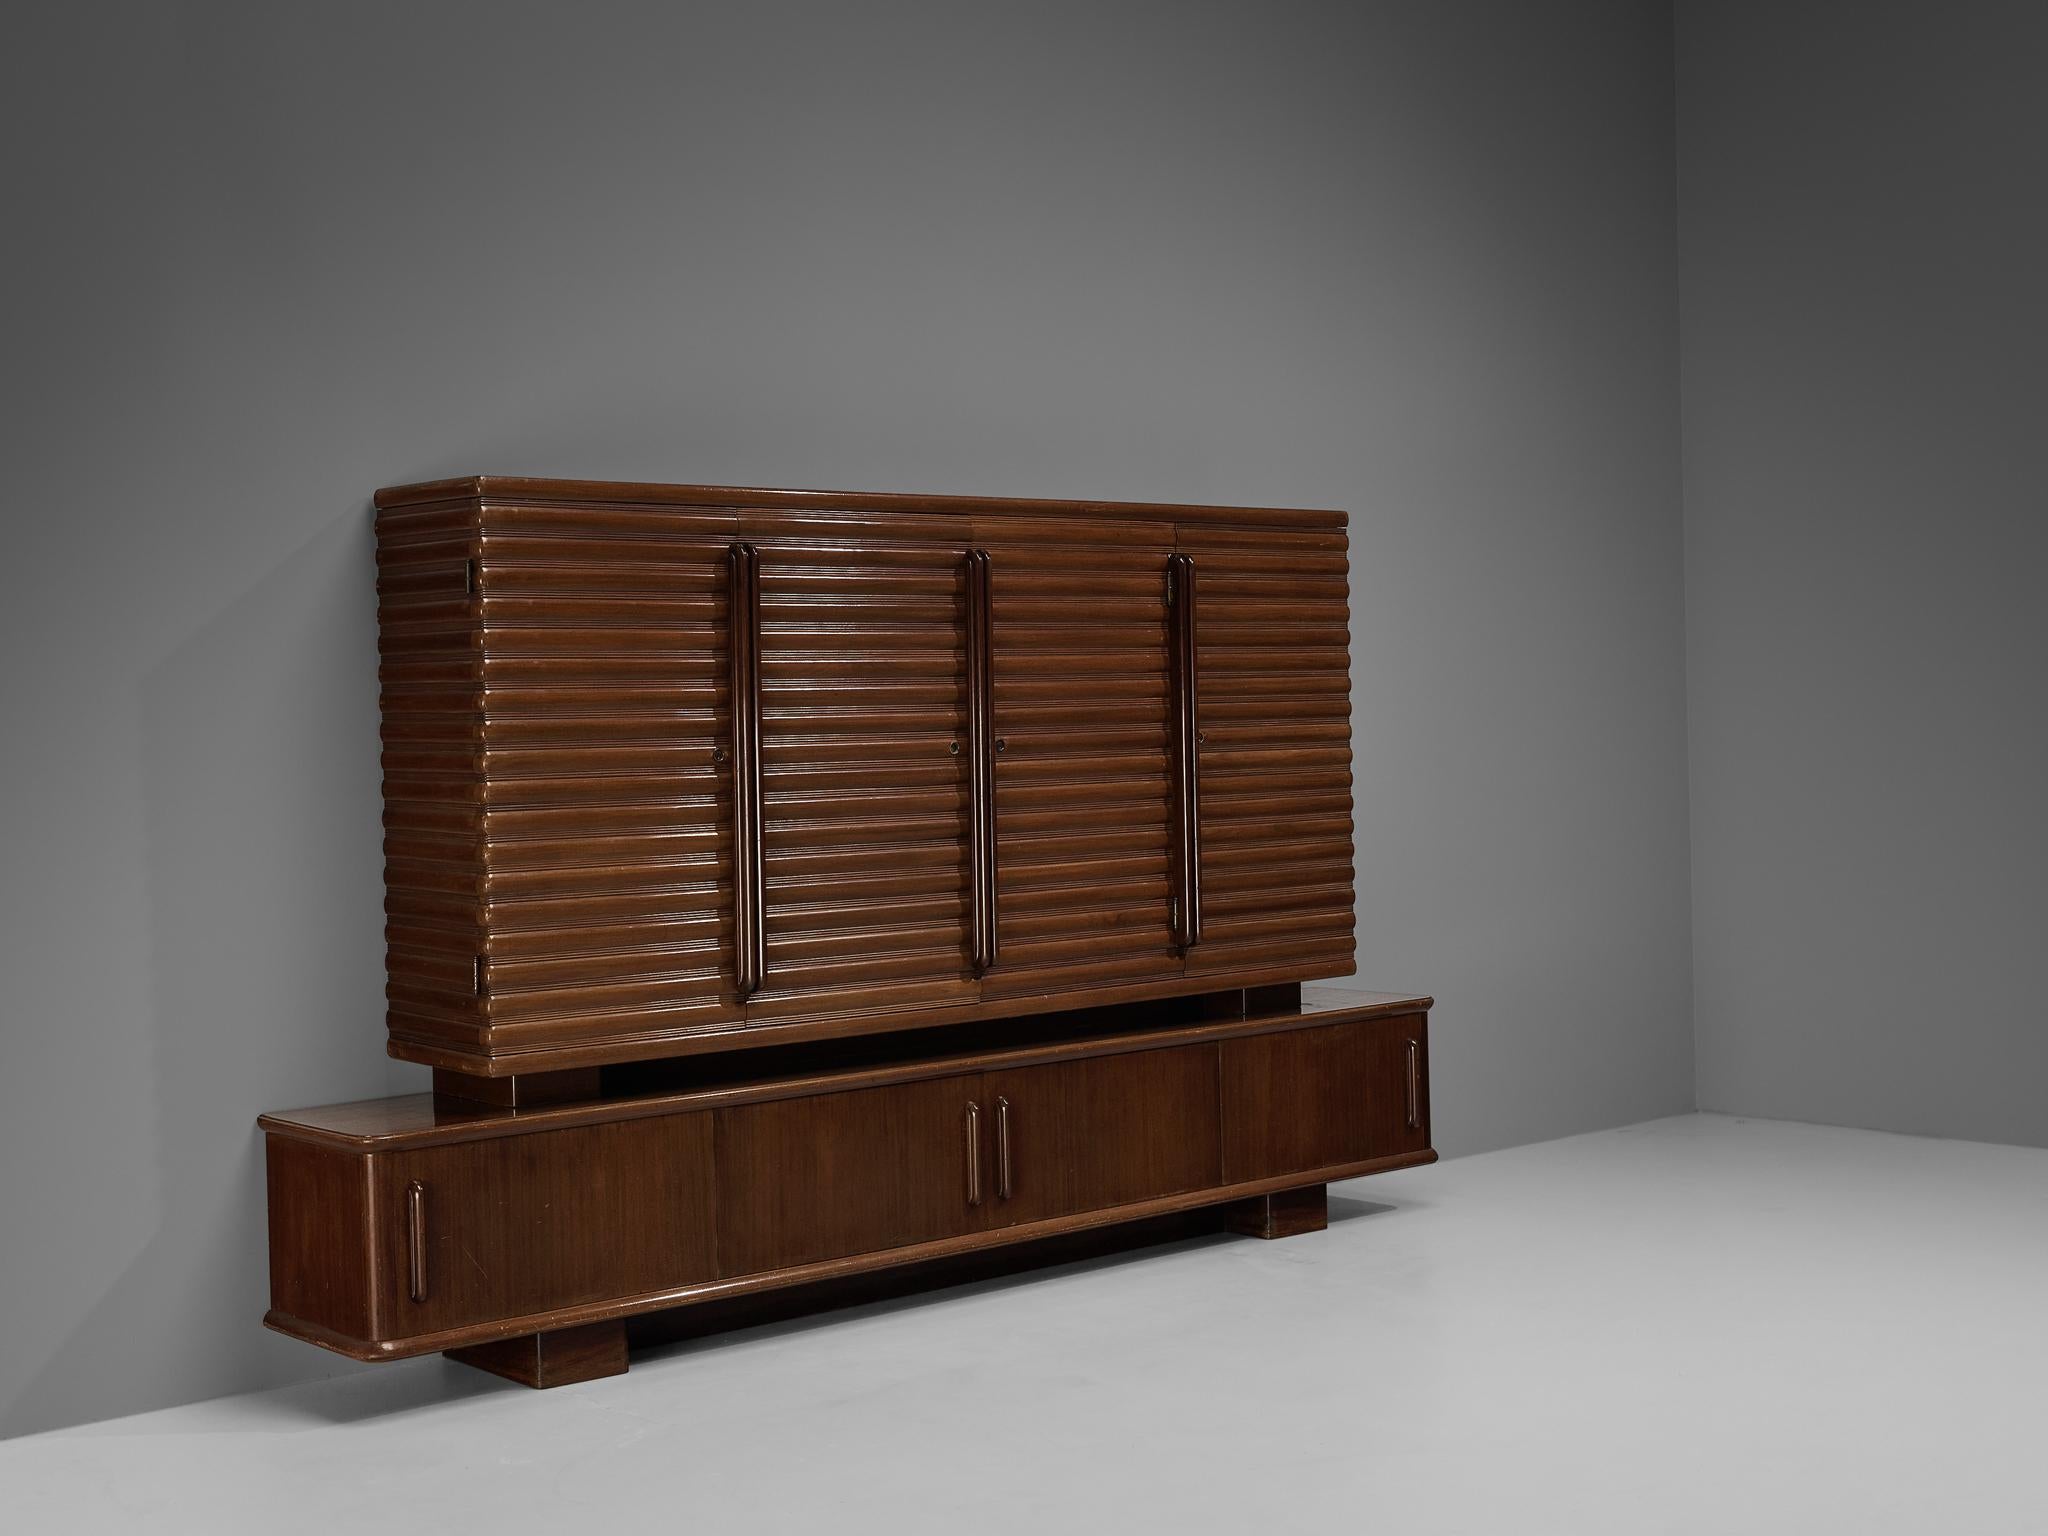 Enrico & Paolo Borghi, sideboard, mahogany, oak, Italy, 1950s

Admirable high sideboard in mahogany with carved doors by Italian duo Enrico & Paolo Borghi, manufactured in the 1950s in Cantu. The storage piece consists of two elements. Firstly, the